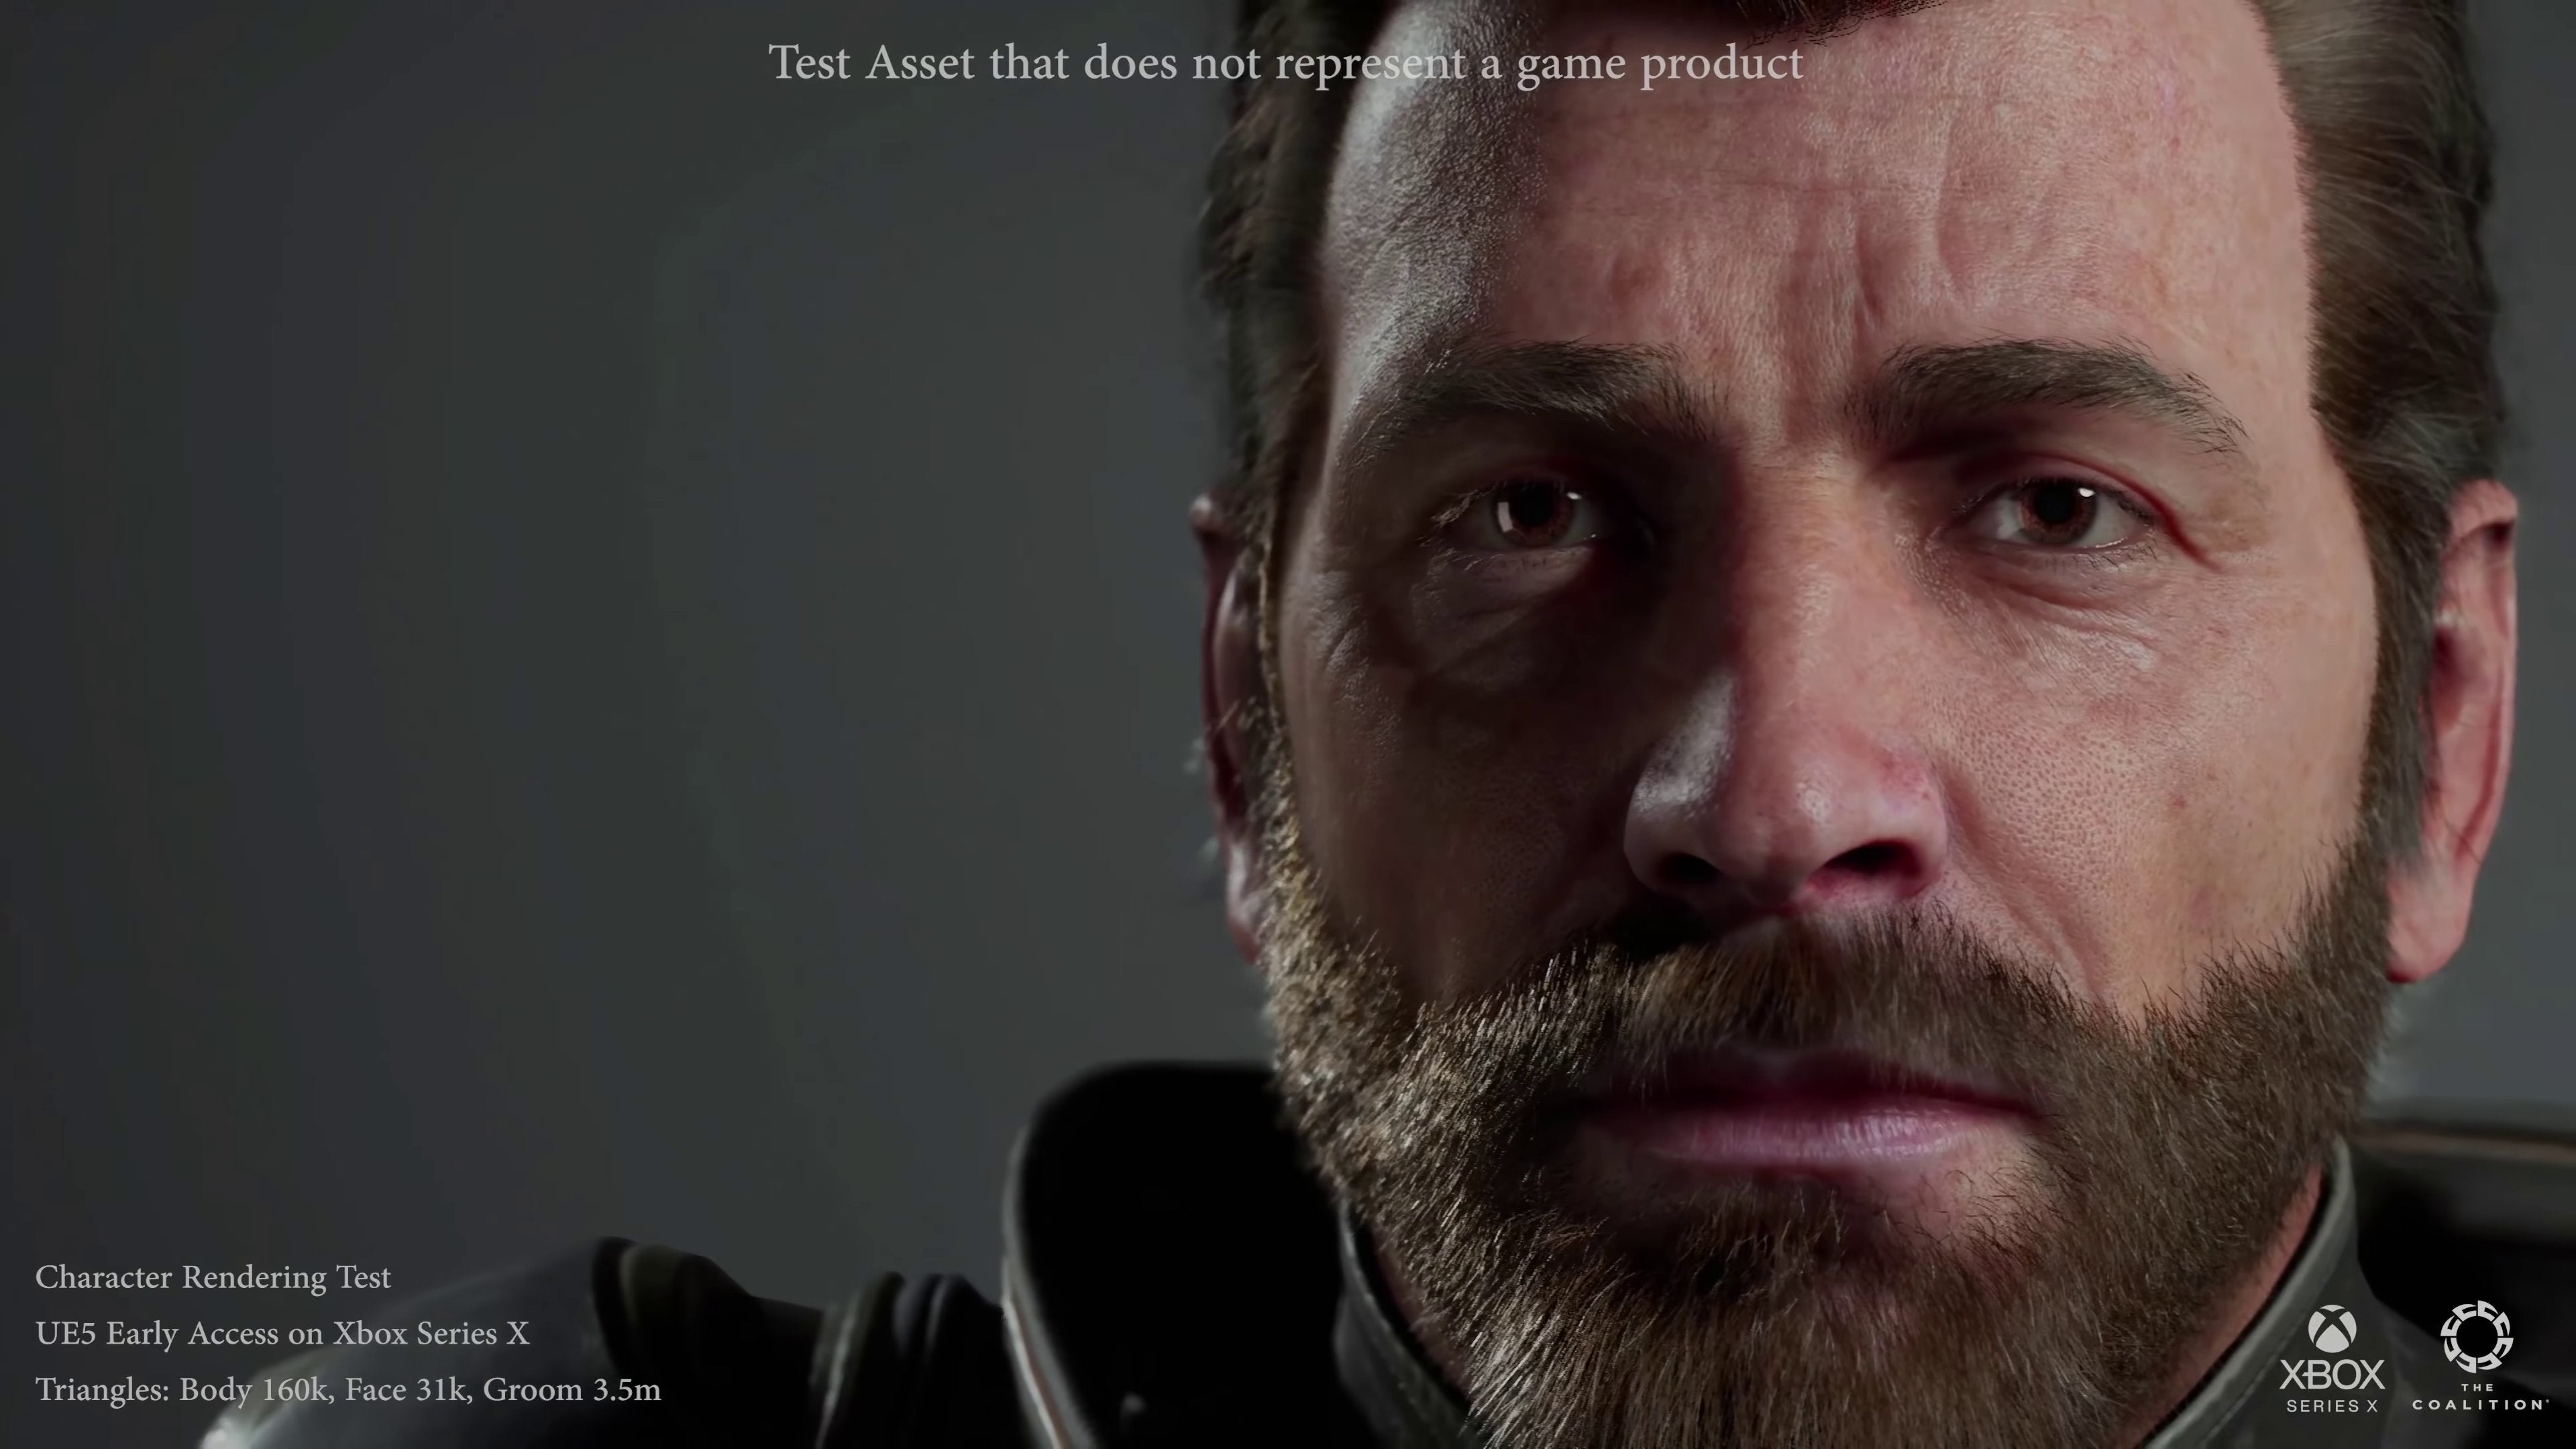 A close-up of a very detailed man from The Coalition's latest Unreal Engine 5 demo